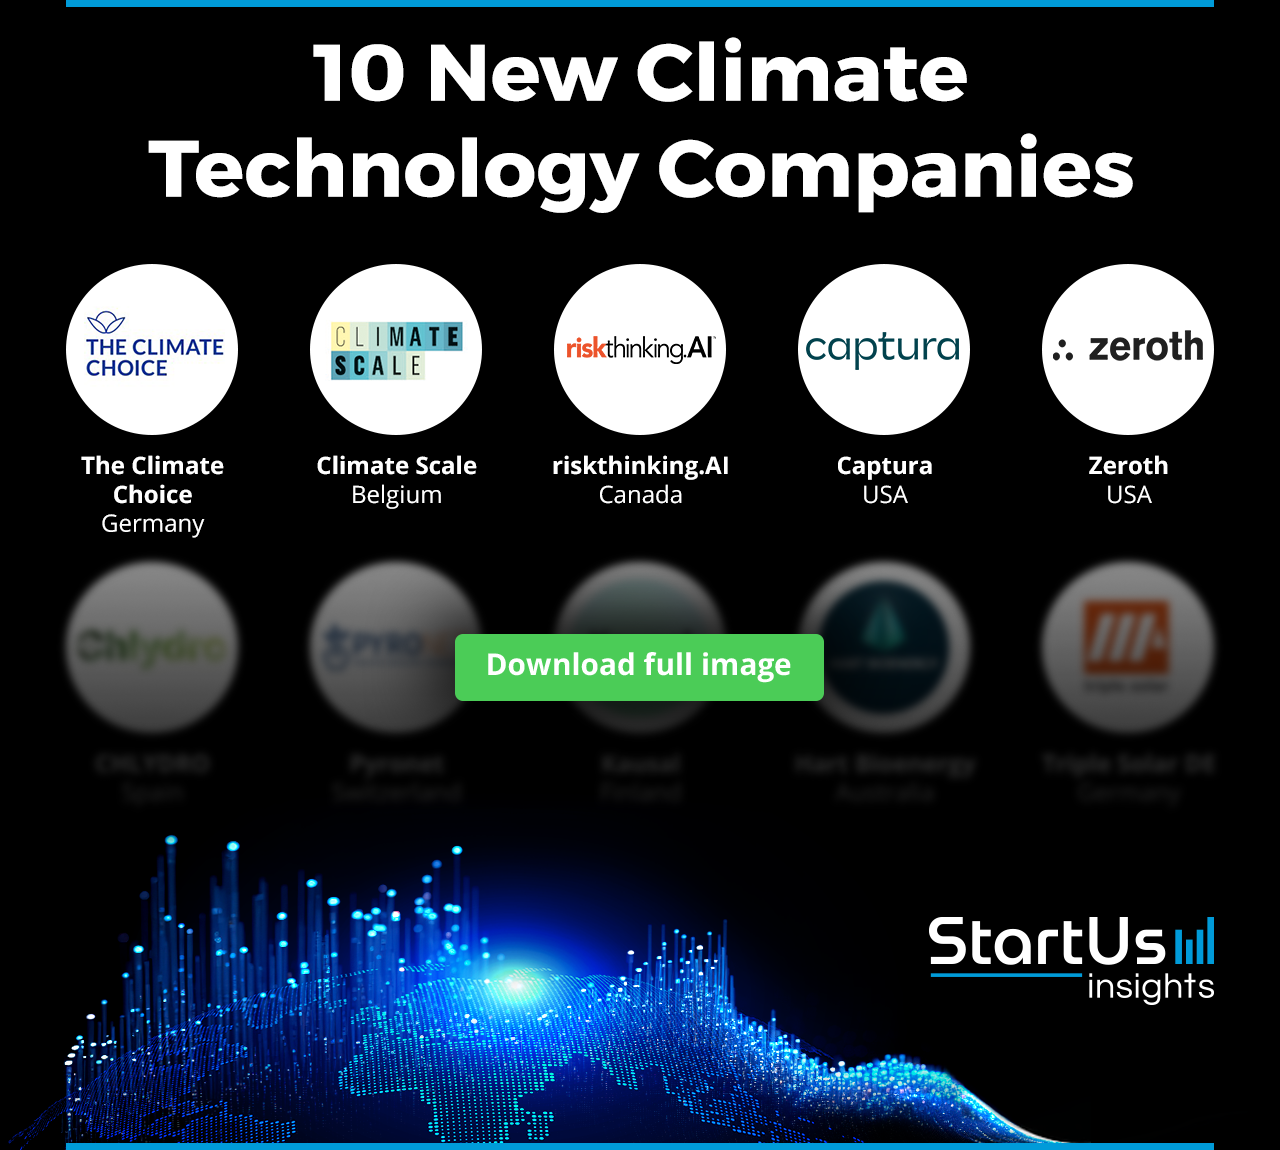 Logos-New-Climate-Technology-Companies-Blurred-StartUs-Insights-noresize